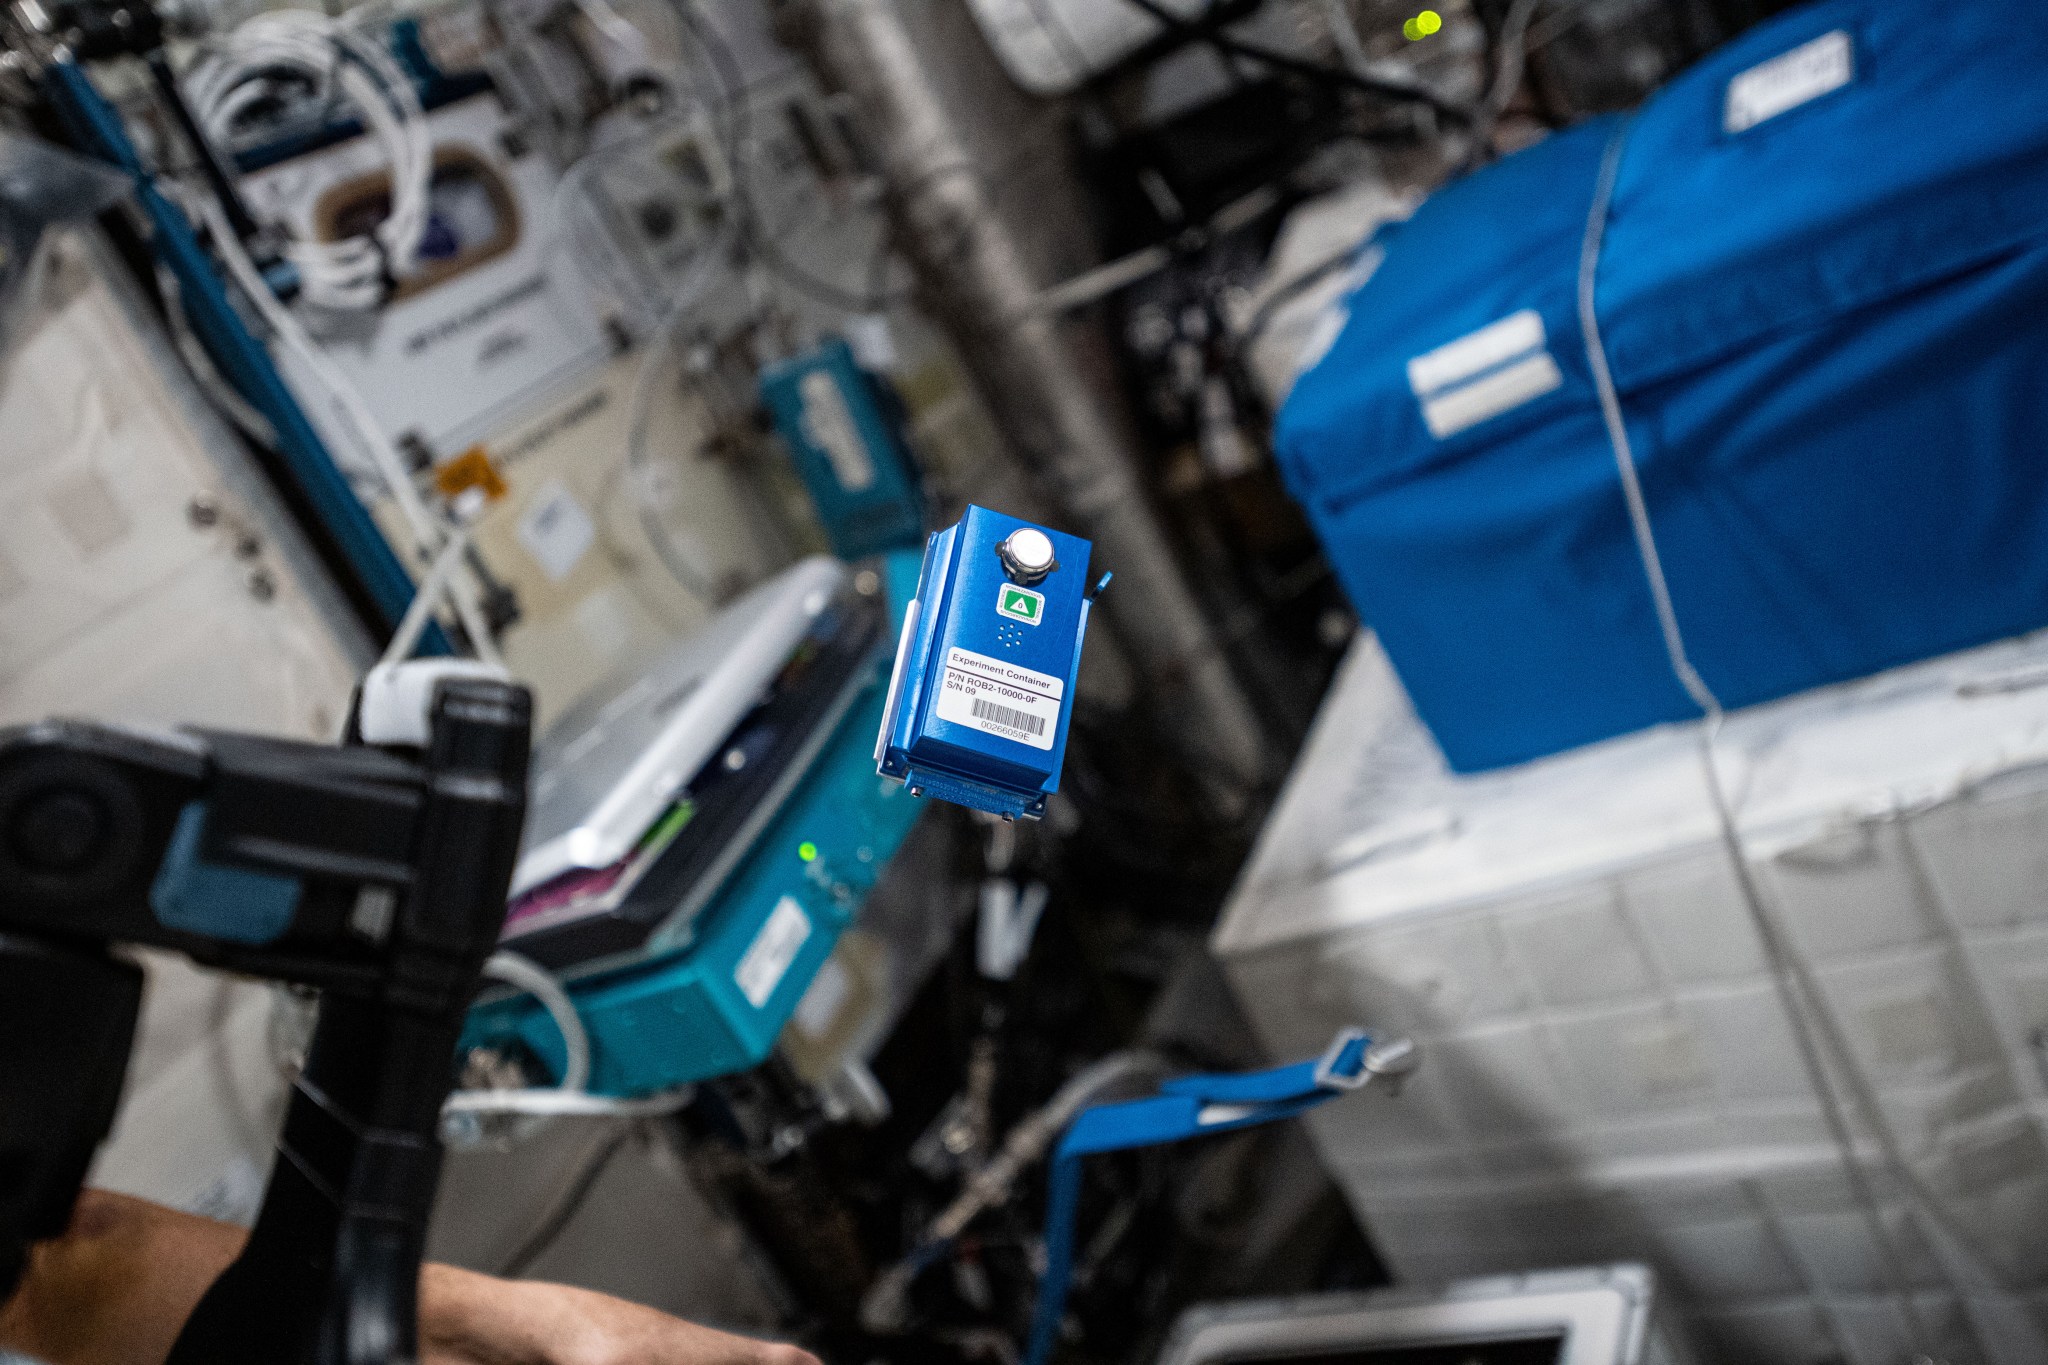 A cell phone-sized blue box with a barcode label and a white button floats in the space station. A closed laptop and several storage boxes are visible in the background and a black camera is mounted in the foreground.